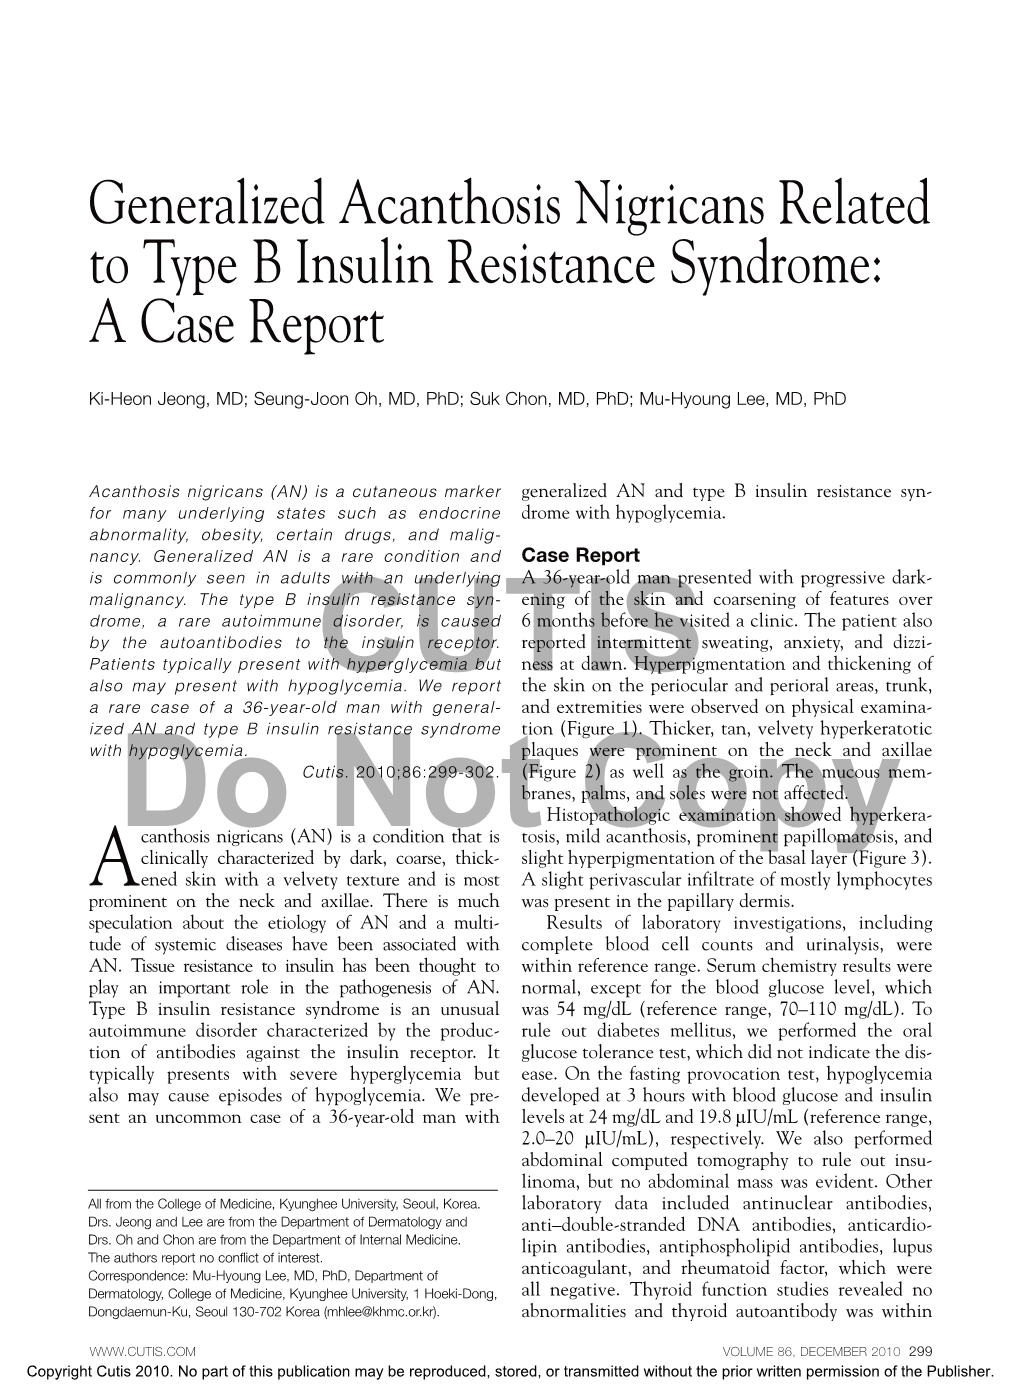 Generalized Acanthosis Nigricans Related to Type B Insulin Resistance Syndrome: a Case Report